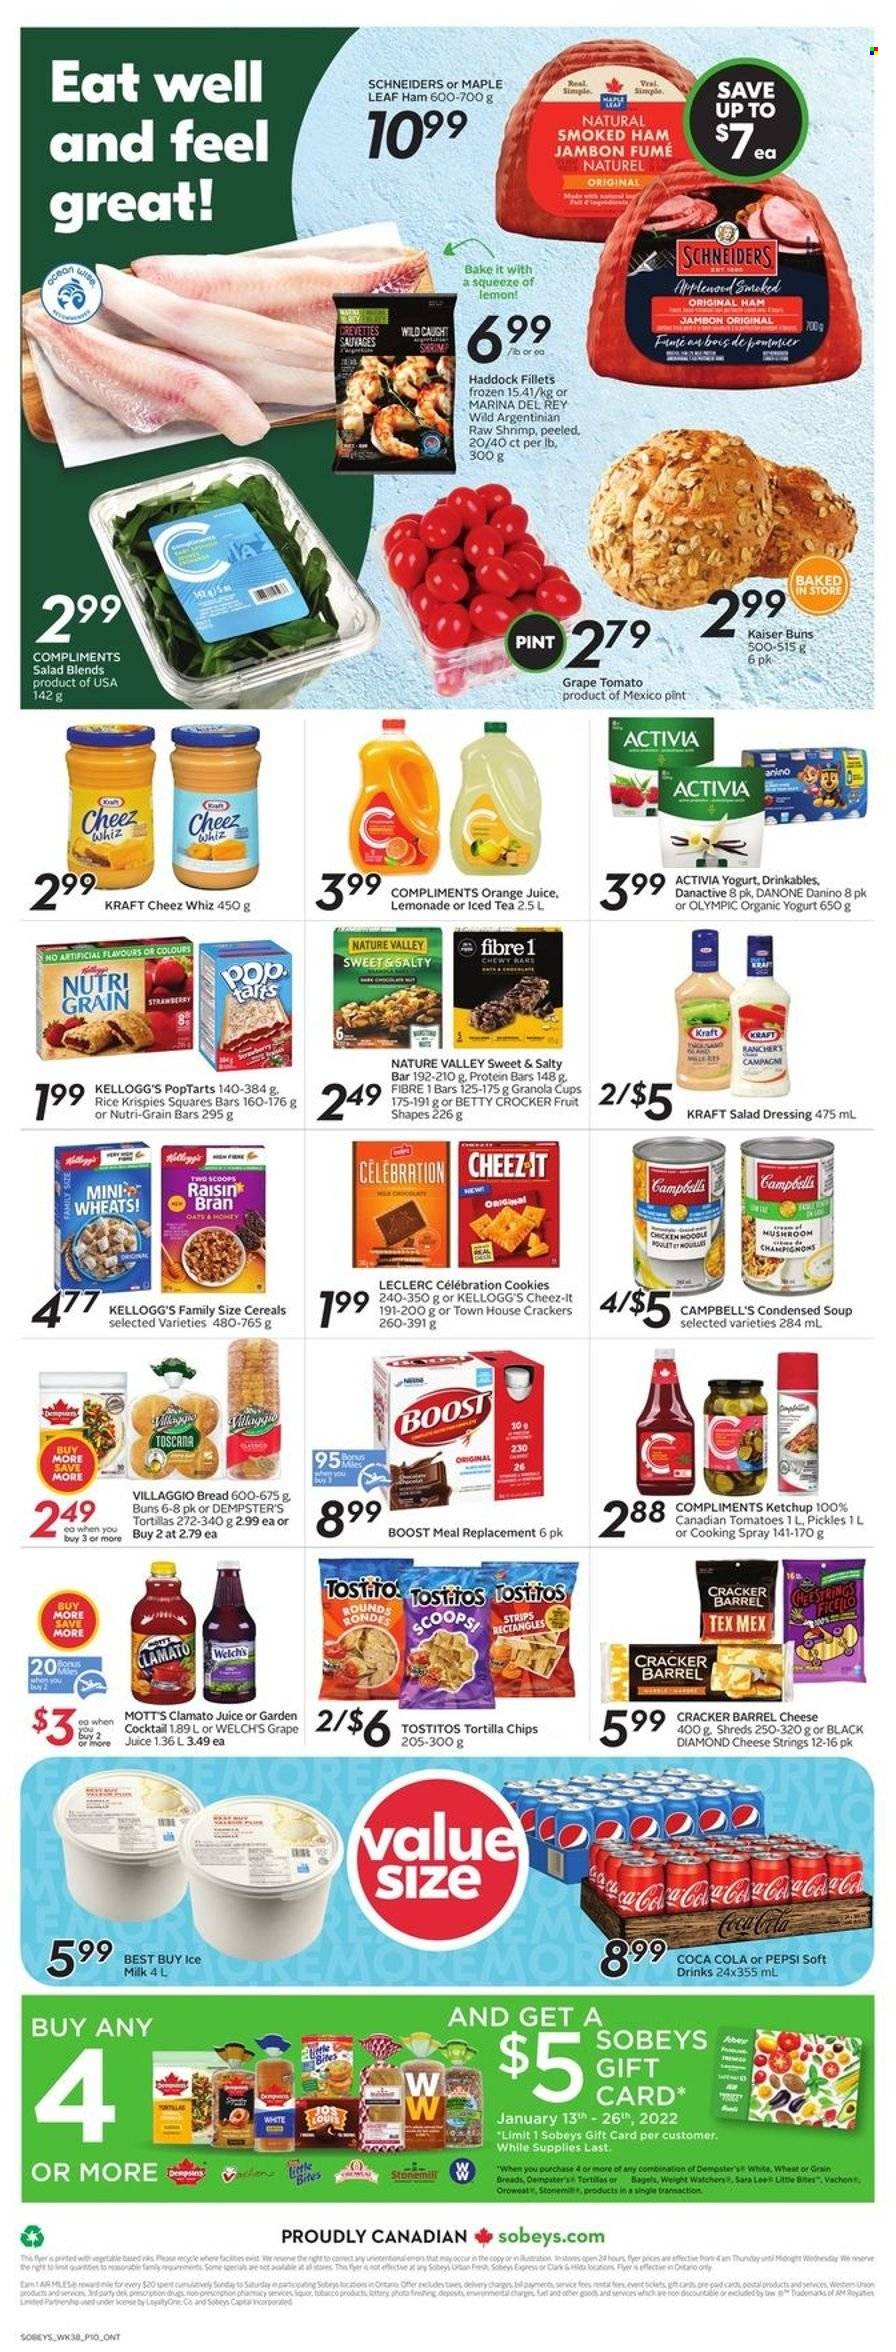 thumbnail - Sobeys Flyer - January 13, 2022 - January 19, 2022 - Sales products - bagels, bread, buns, tomatoes, Welch's, Mott's, haddock, shrimps, Campbell's, condensed soup, soup, instant soup, Kraft®, ham, smoked ham, string cheese, yoghurt, organic yoghurt, Activia, milk, strips, cookies, Celebration, crackers, Kellogg's, Little Bites, tortilla chips, Cheez-It, Tostitos, pickles, protein bar, Rice Krispies, Nature Valley, Nutri-Grain, salad dressing, dressing, cooking spray, Coca-Cola, lemonade, Pepsi, orange juice, juice, ice tea, Clamato, soft drink, Boost, L'Or, Danone, granola, ketchup. Page 2.